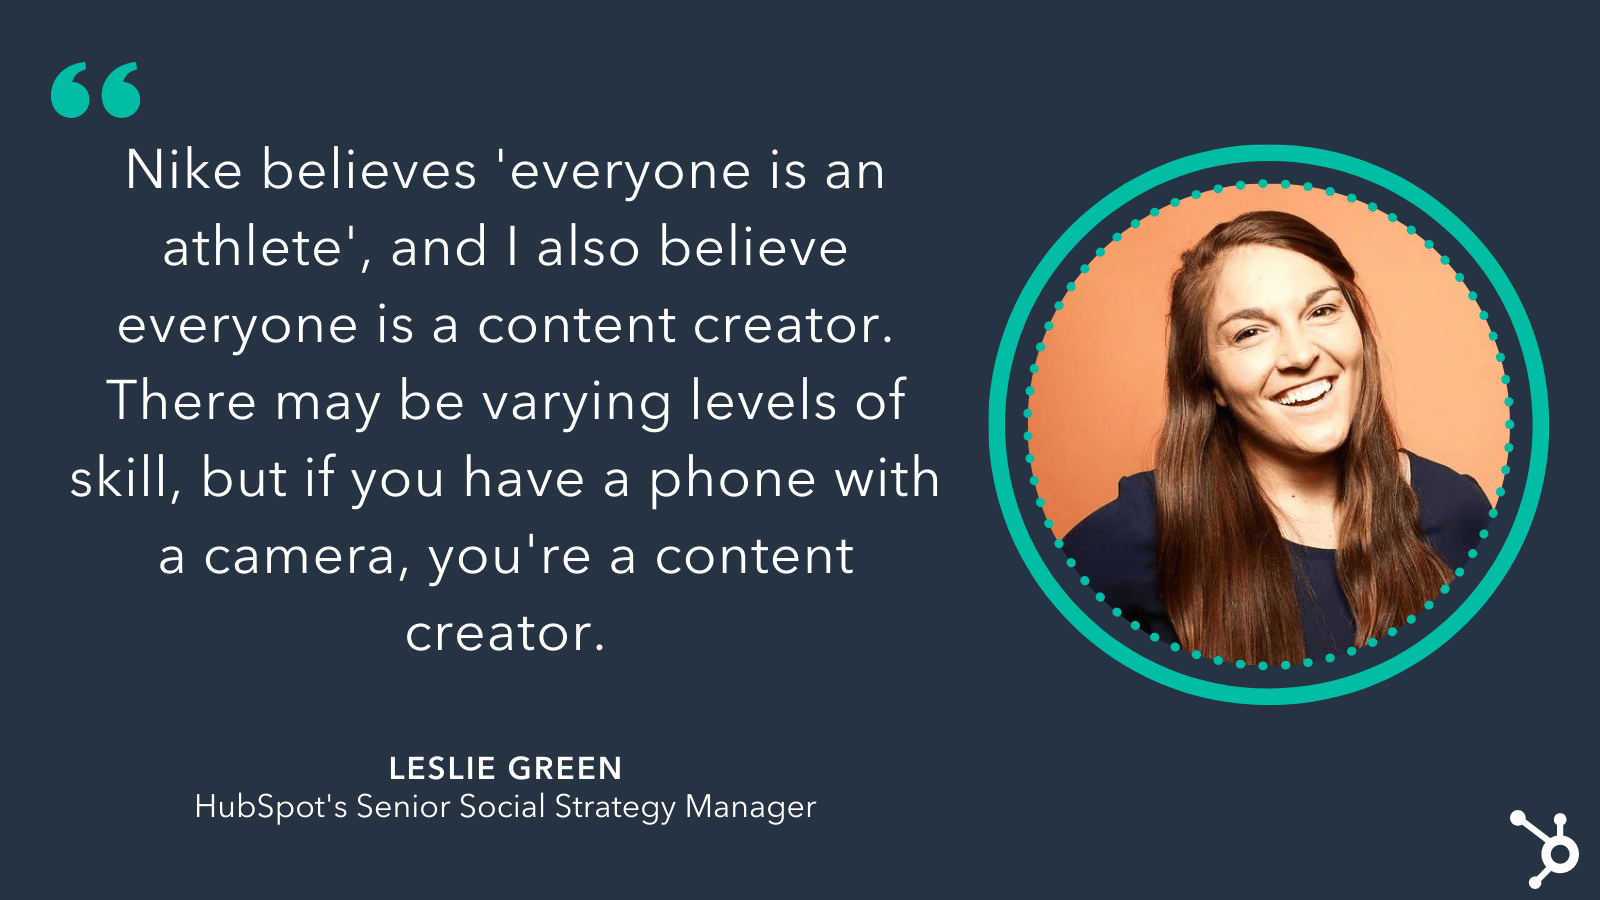 everyone is a content creator according to leslie green